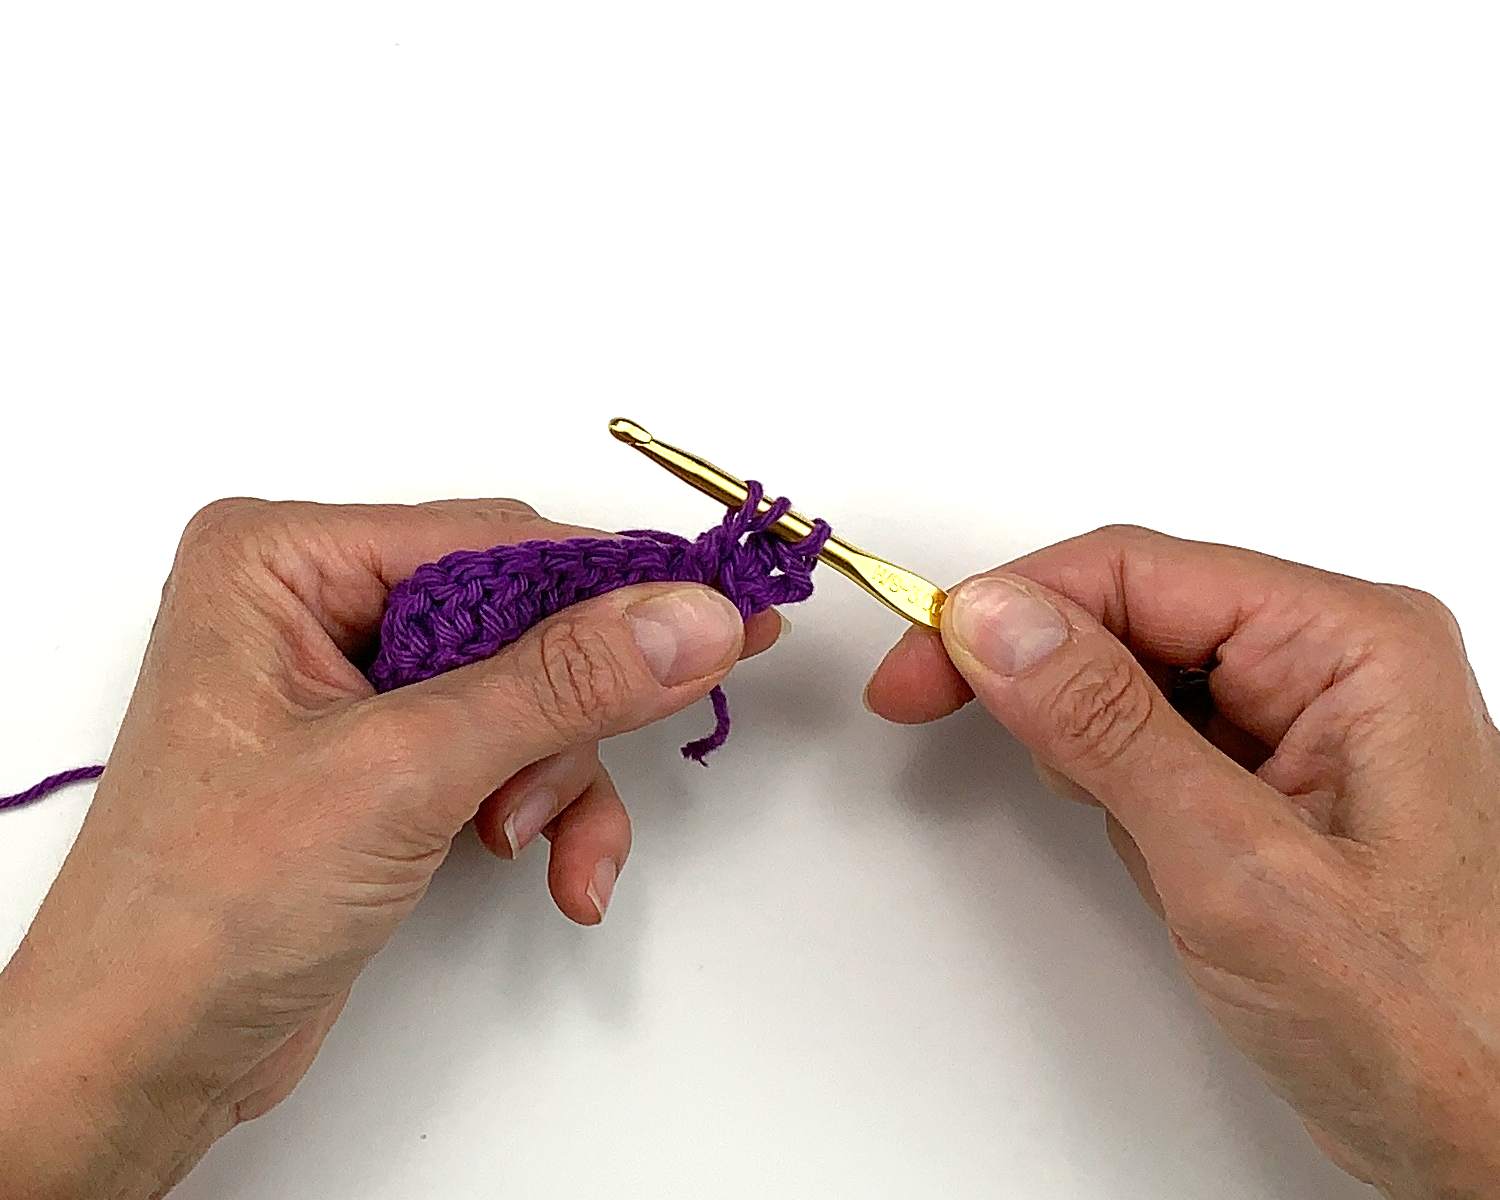 image of hands holding crochet work and a hook